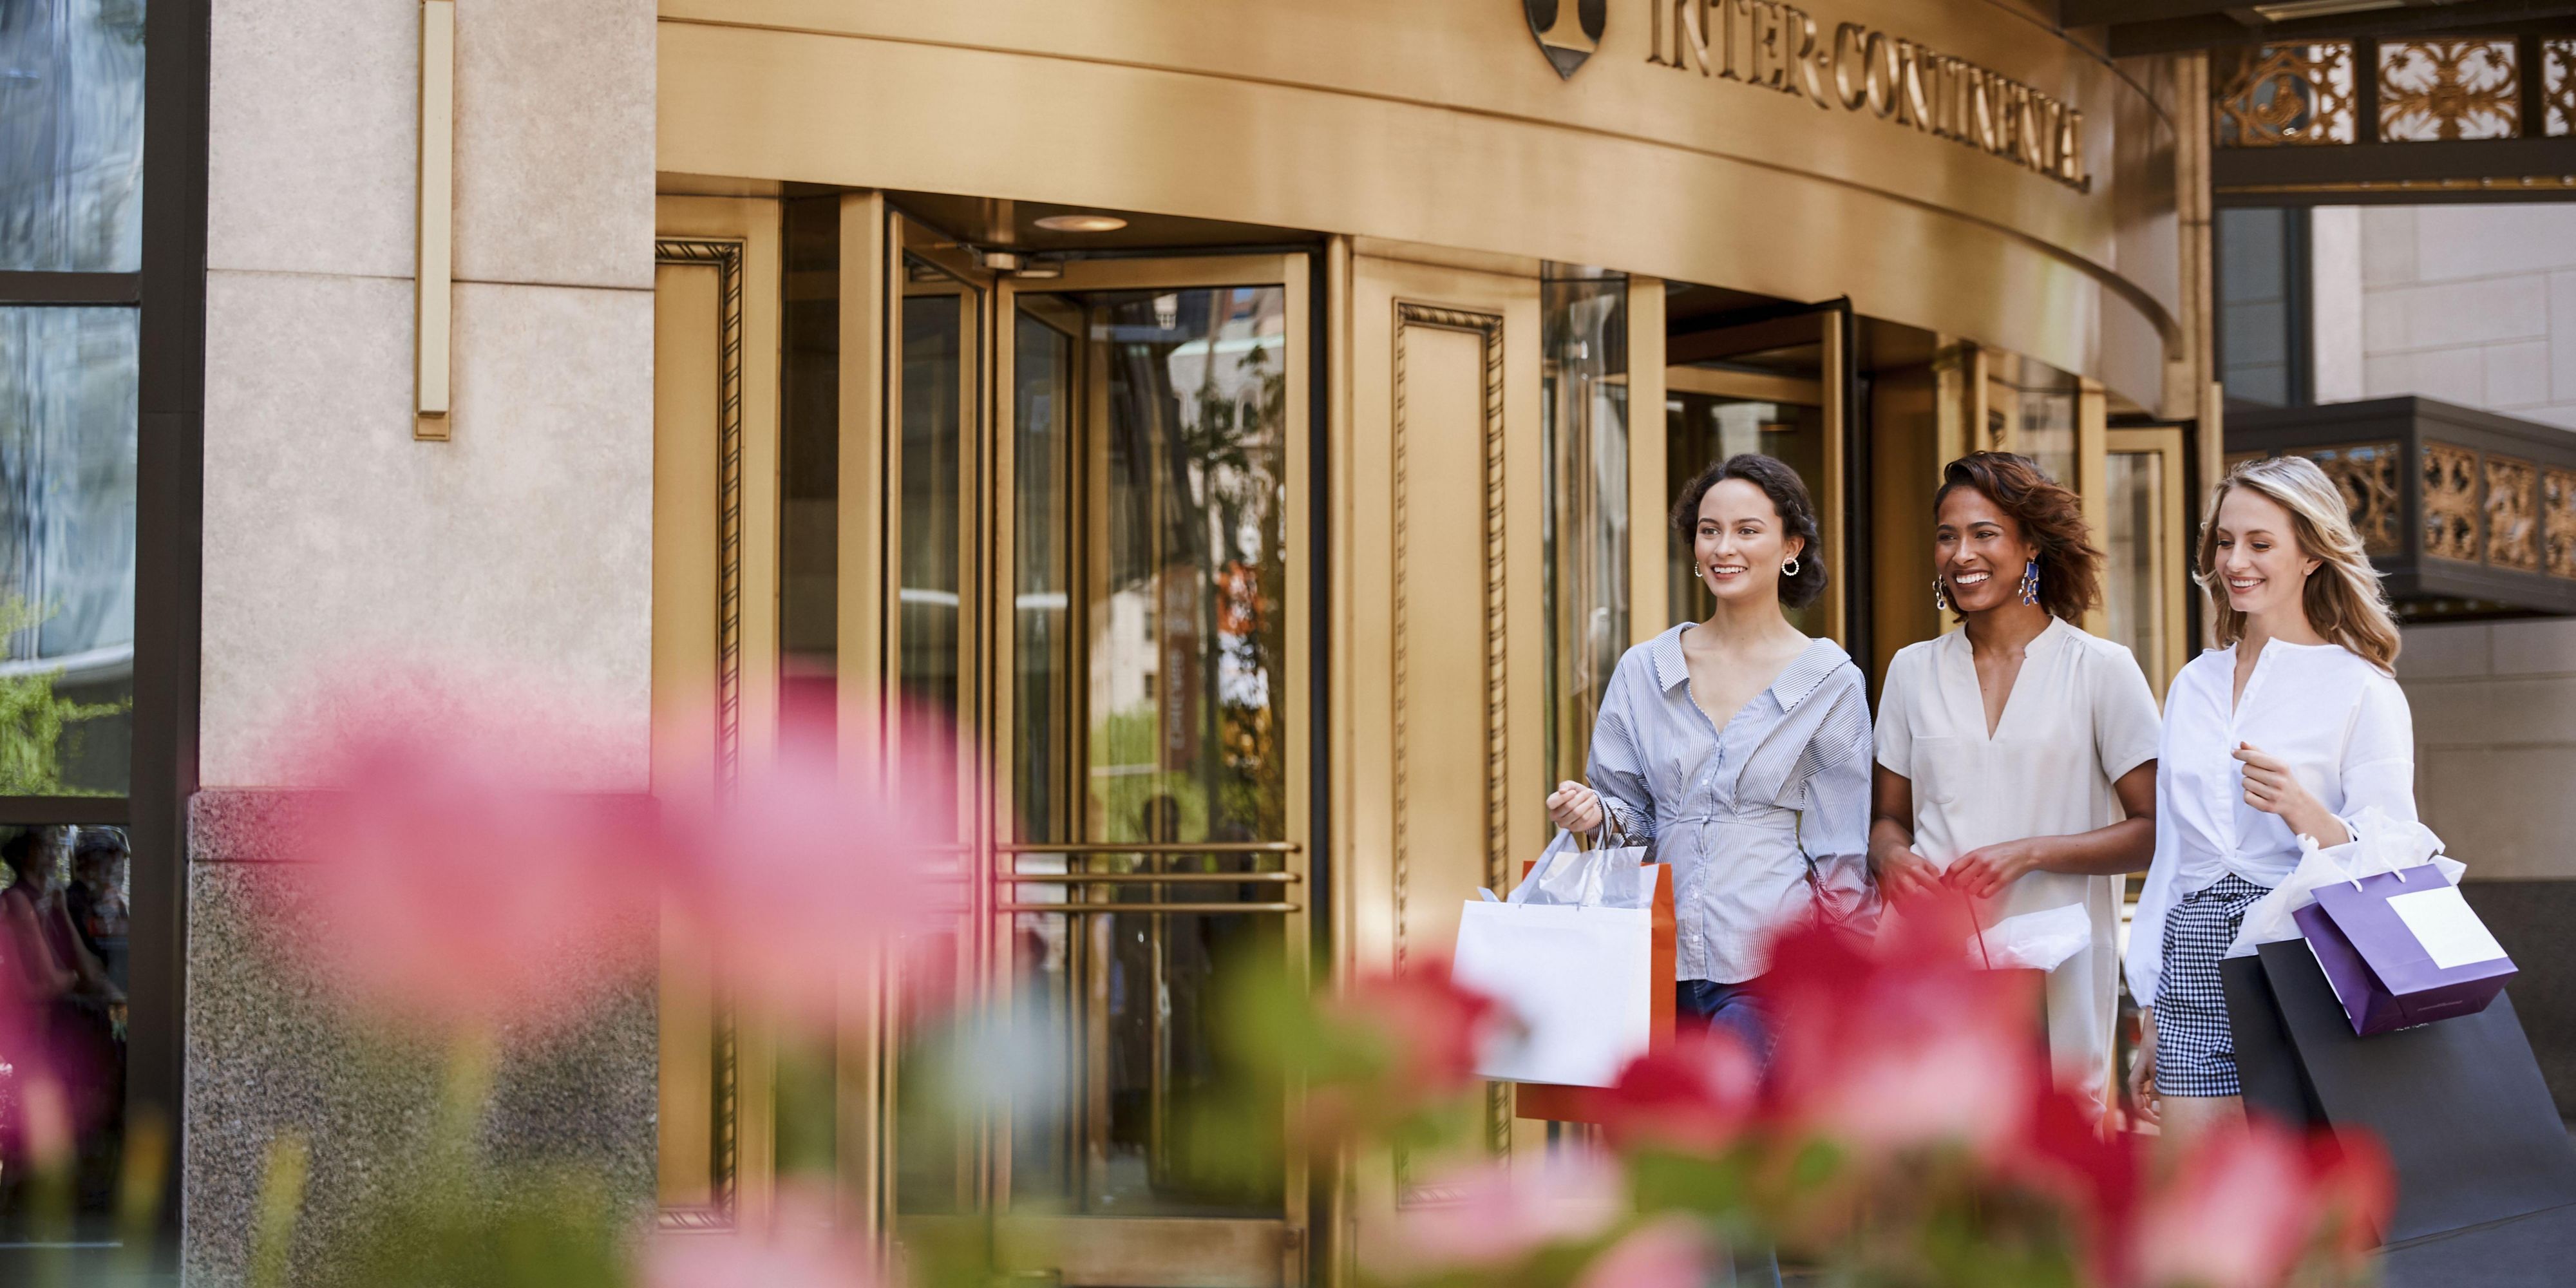 InterContinental Chicago Magnificent Mile is the only downtown Chicago hotel with direct entry from Michigan Avenue. Our signature bronze doors open onto the famed Magnificent Mile, just steps away from the city’s best shopping, fine dining, art galleries, museums, and theaters.